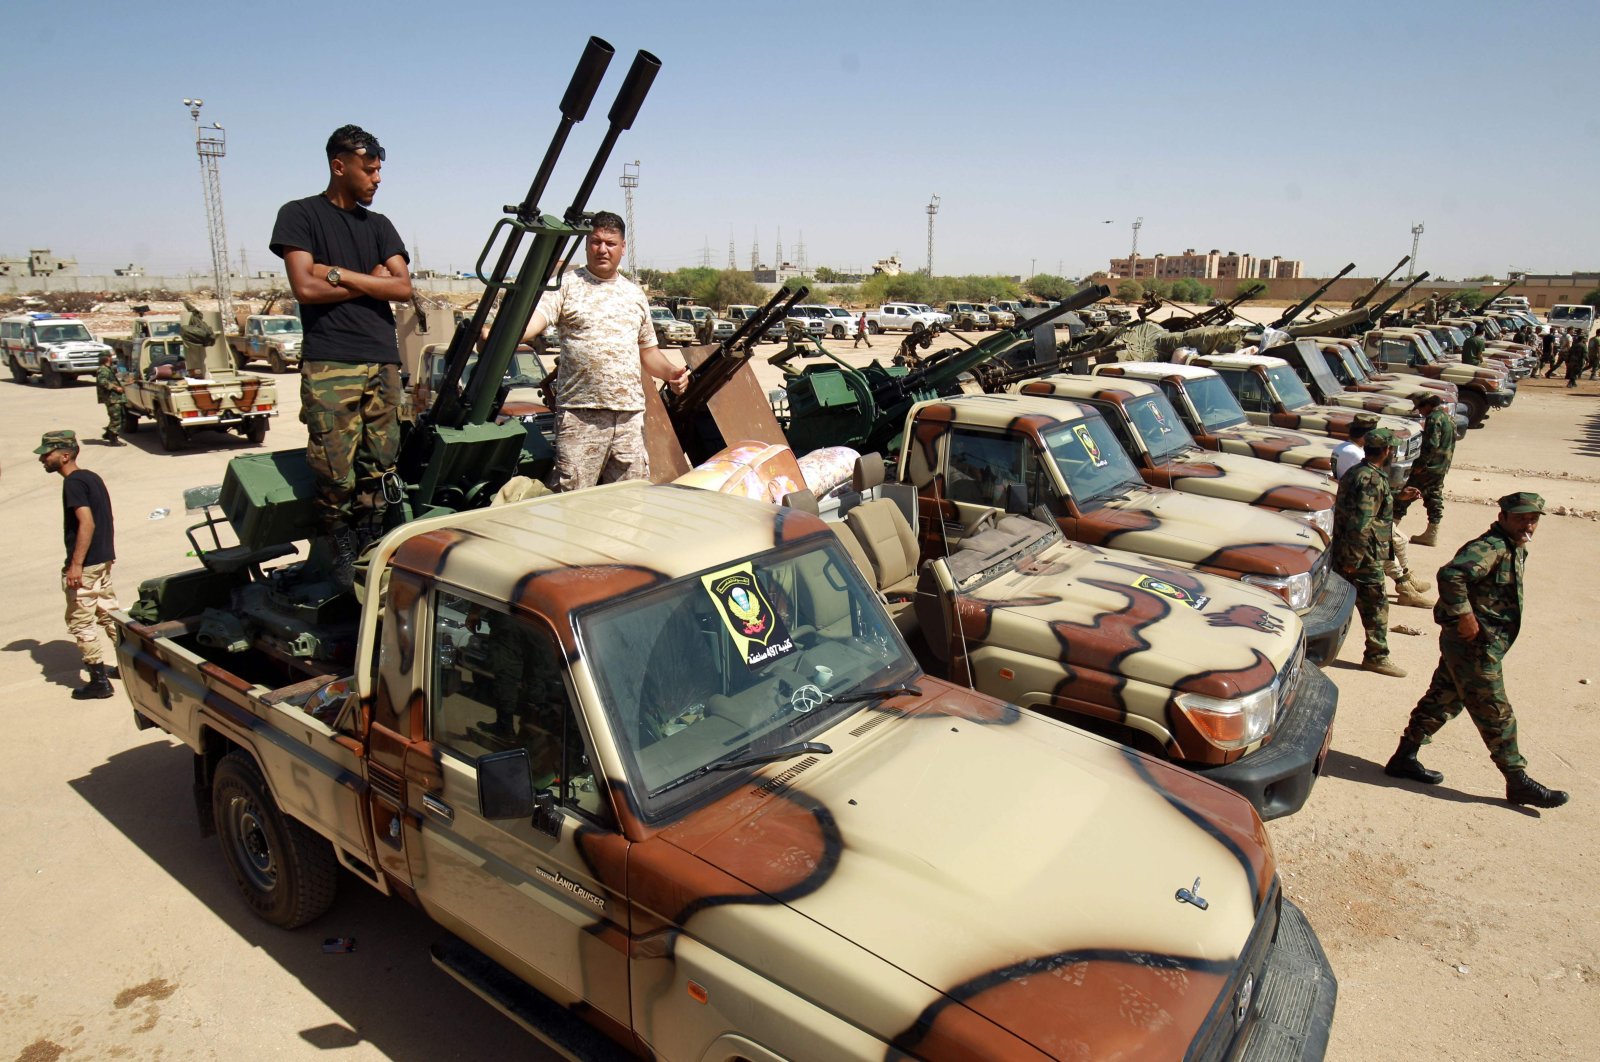 Forces loyal to putschist Gen. Khalifa Haftar gather in the city of Benghazi, on their way to back up fellow fighters on the front line west of the city of Sirte, Libya, June 18, 2020. (AFP Photo)